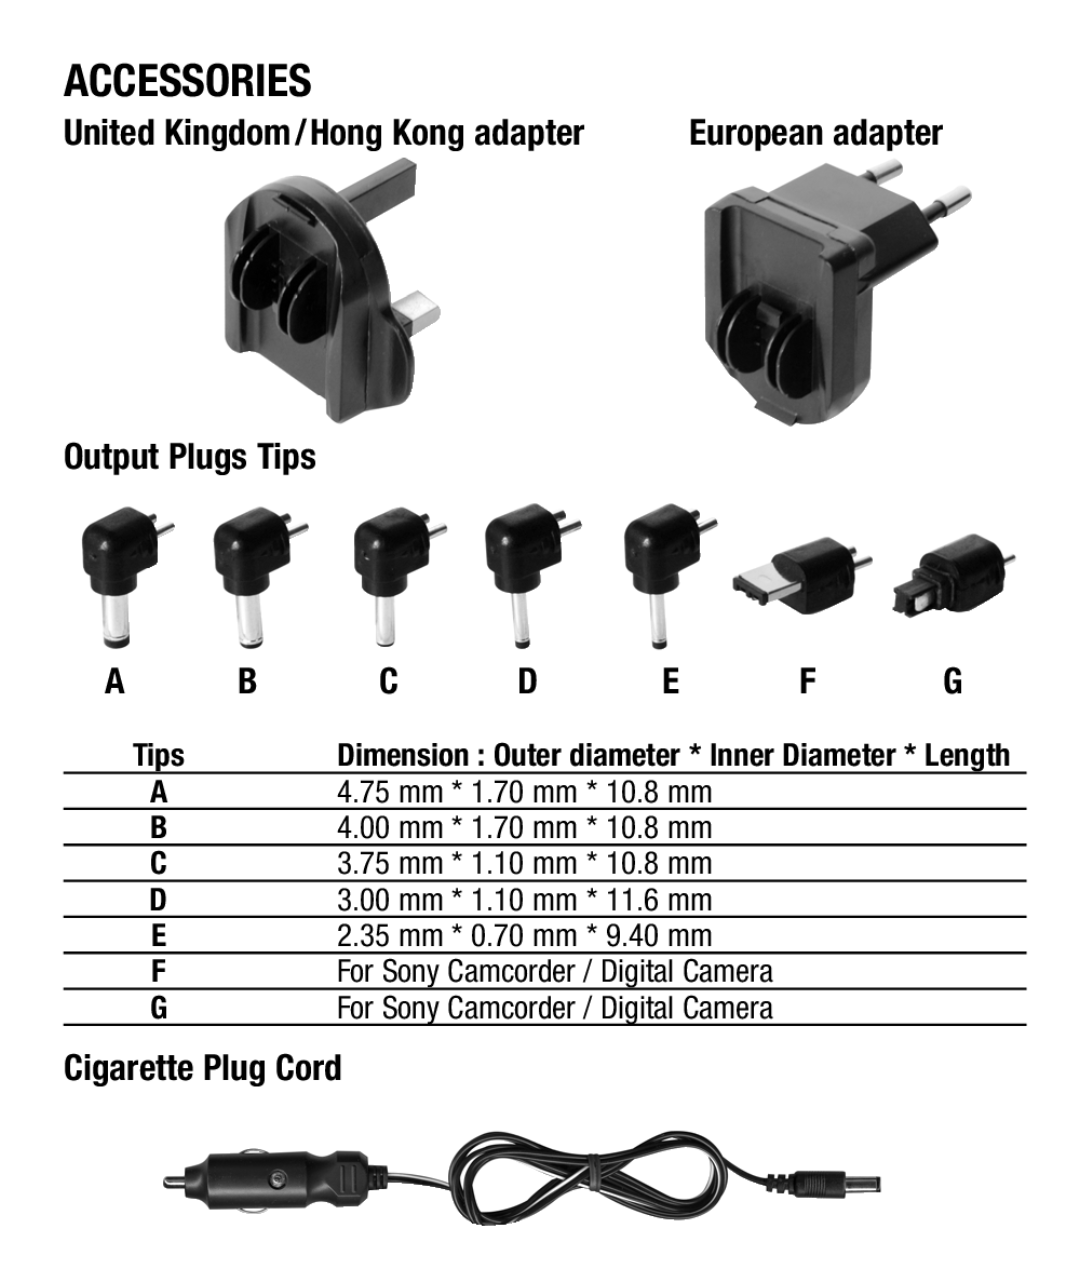 Maxell AC 3000 Accessories, Output Plugs Tips, Cigarette Plug Cord, United Kingdom/Hong Kong adapter, European adapter 